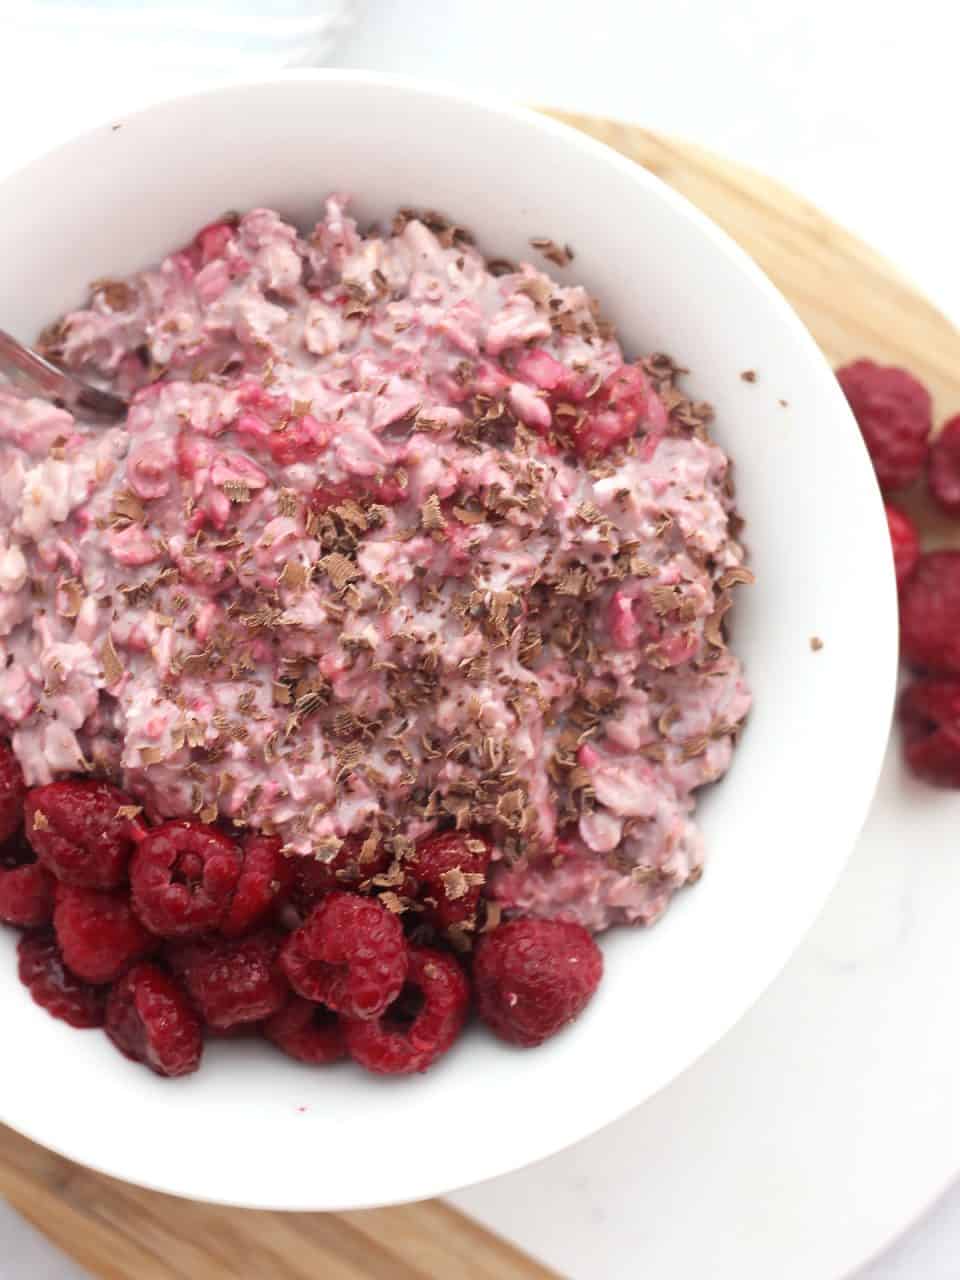 Overhead shot of a bowl of overnight oats topped with fresh raspberries and chocolate shavings.